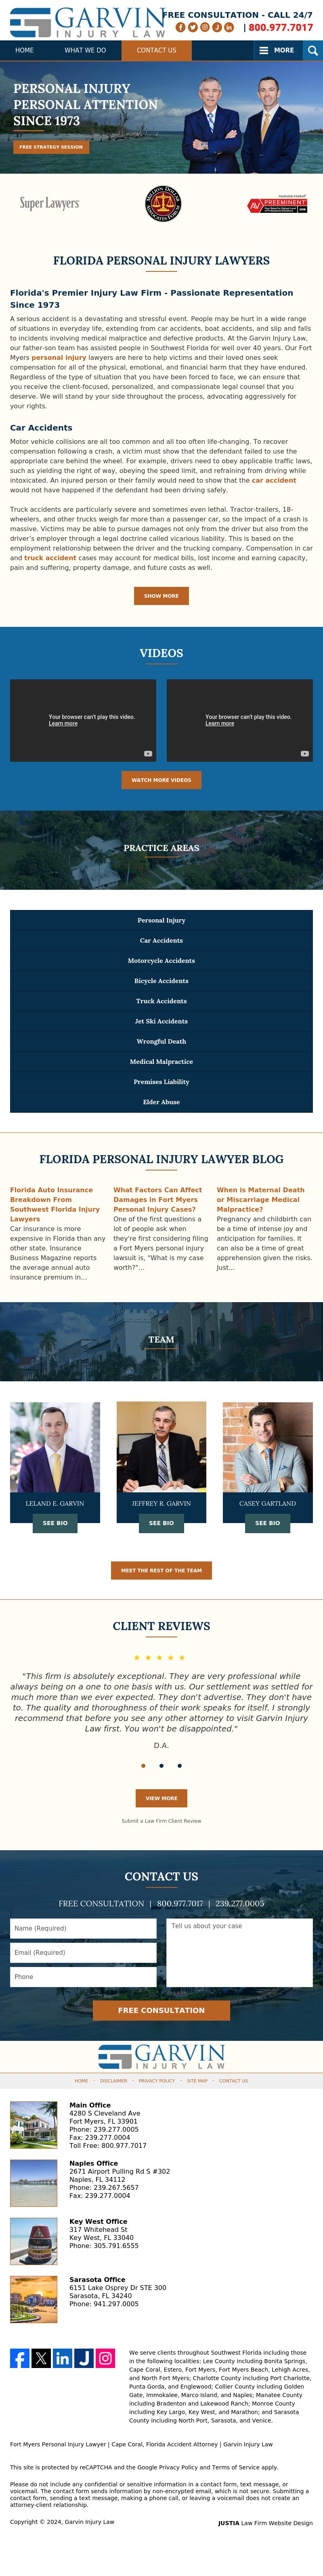 Garvin Law Firm - Naples FL Lawyers